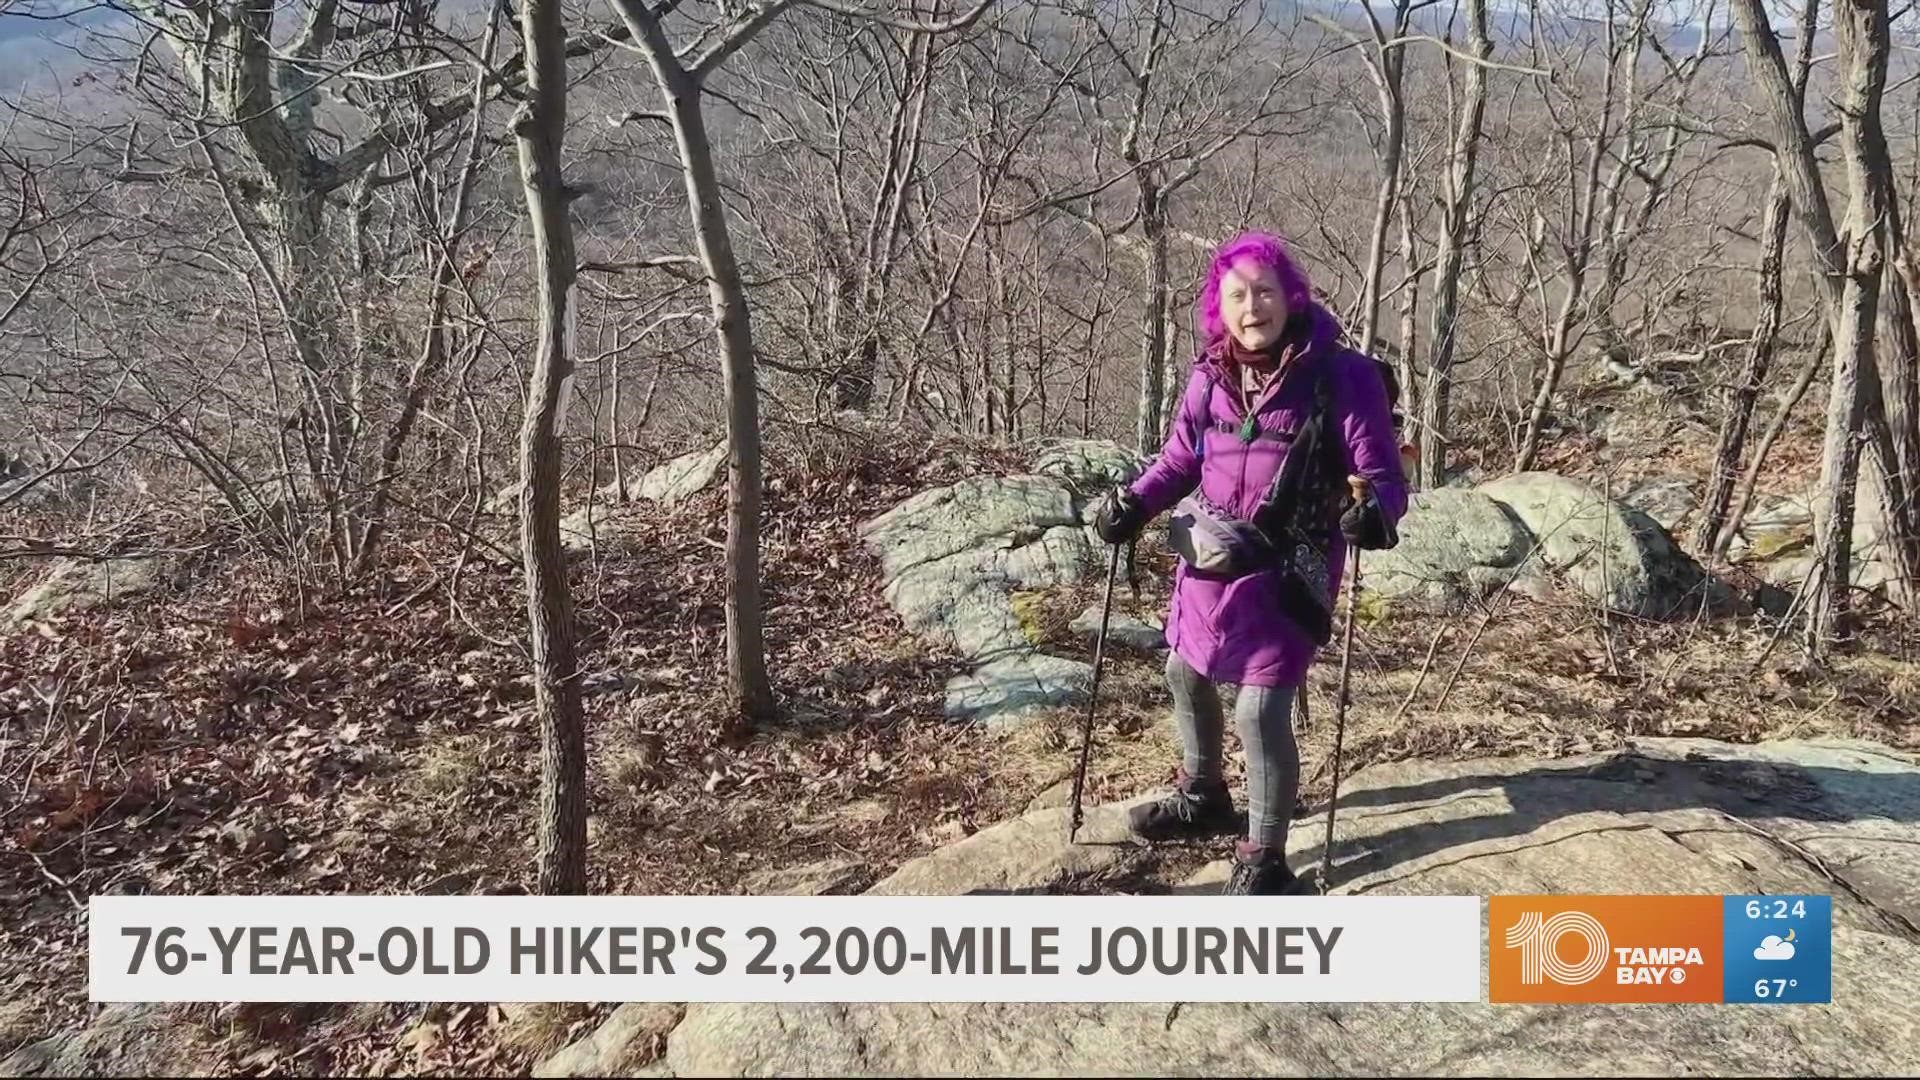 Pamela Clark is hoping to become the oldest female to complete the 2,200-mile hike in one year, and she's about 500 miles from finishing!